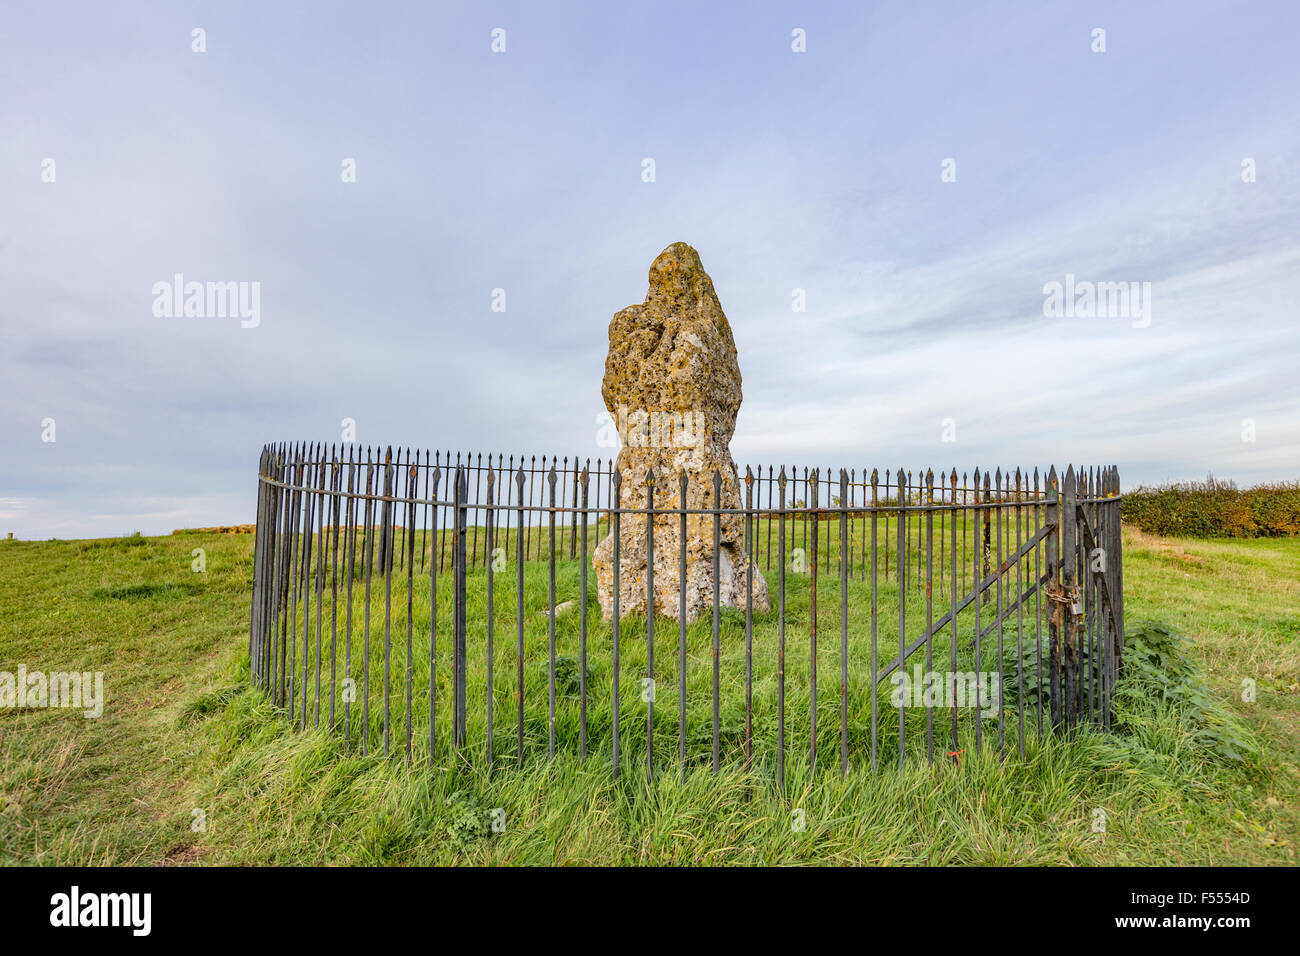 The King Stone, part of the Rollright Stones, thought to be a Bronze Age grave marker, Oxfordshire, England, UK Stock Photo